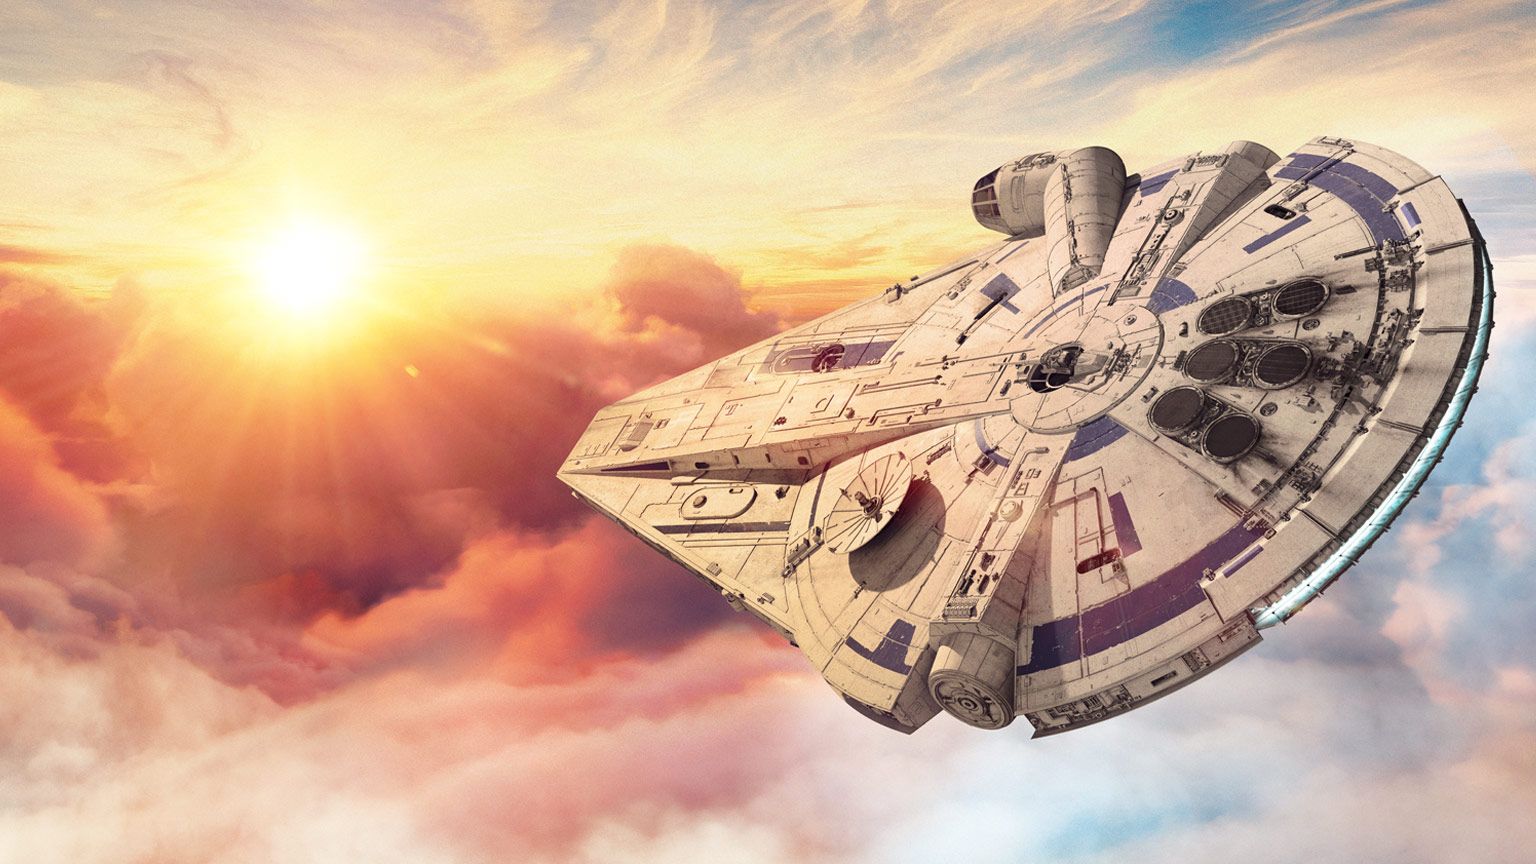 Designing the Solo: A Star Wars Story Millennium Falcon